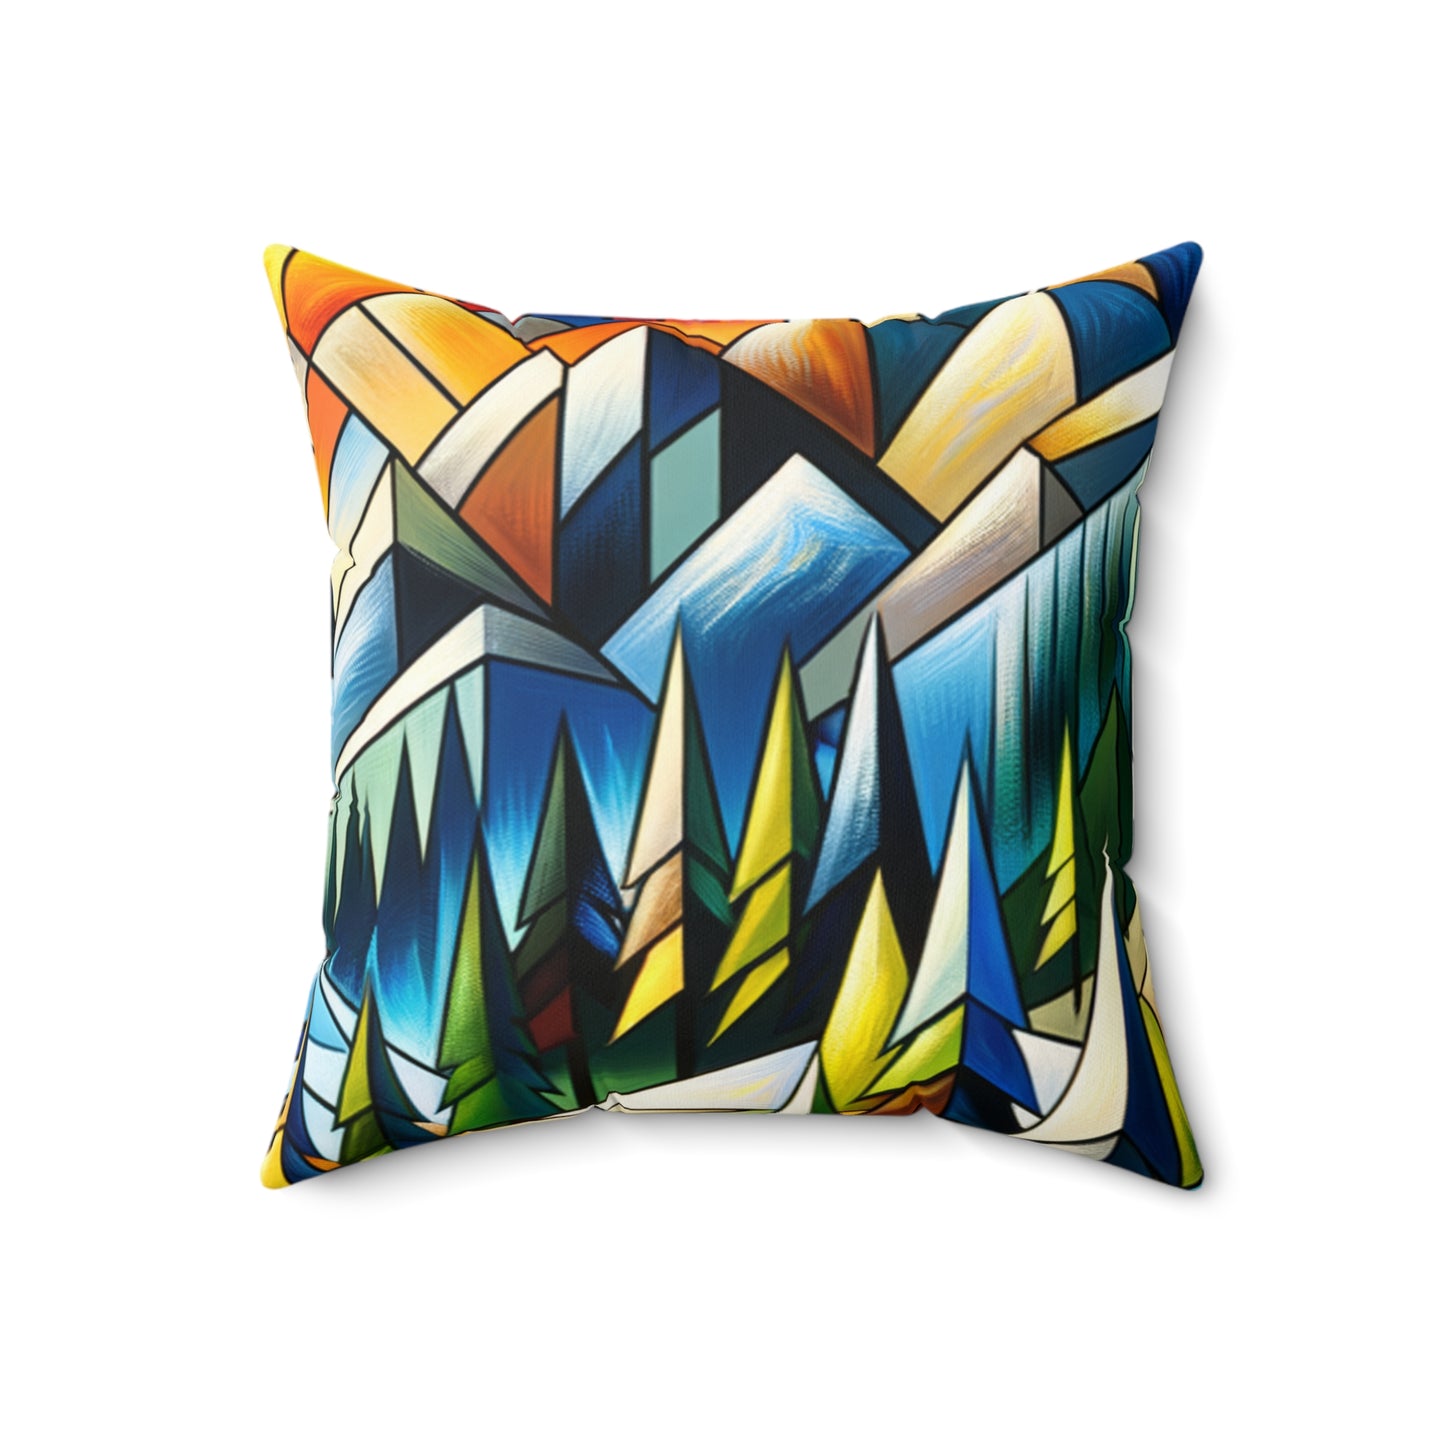 "Cubic Naturalism" - The Alien Spun Polyester Square Pillow Cubism Style